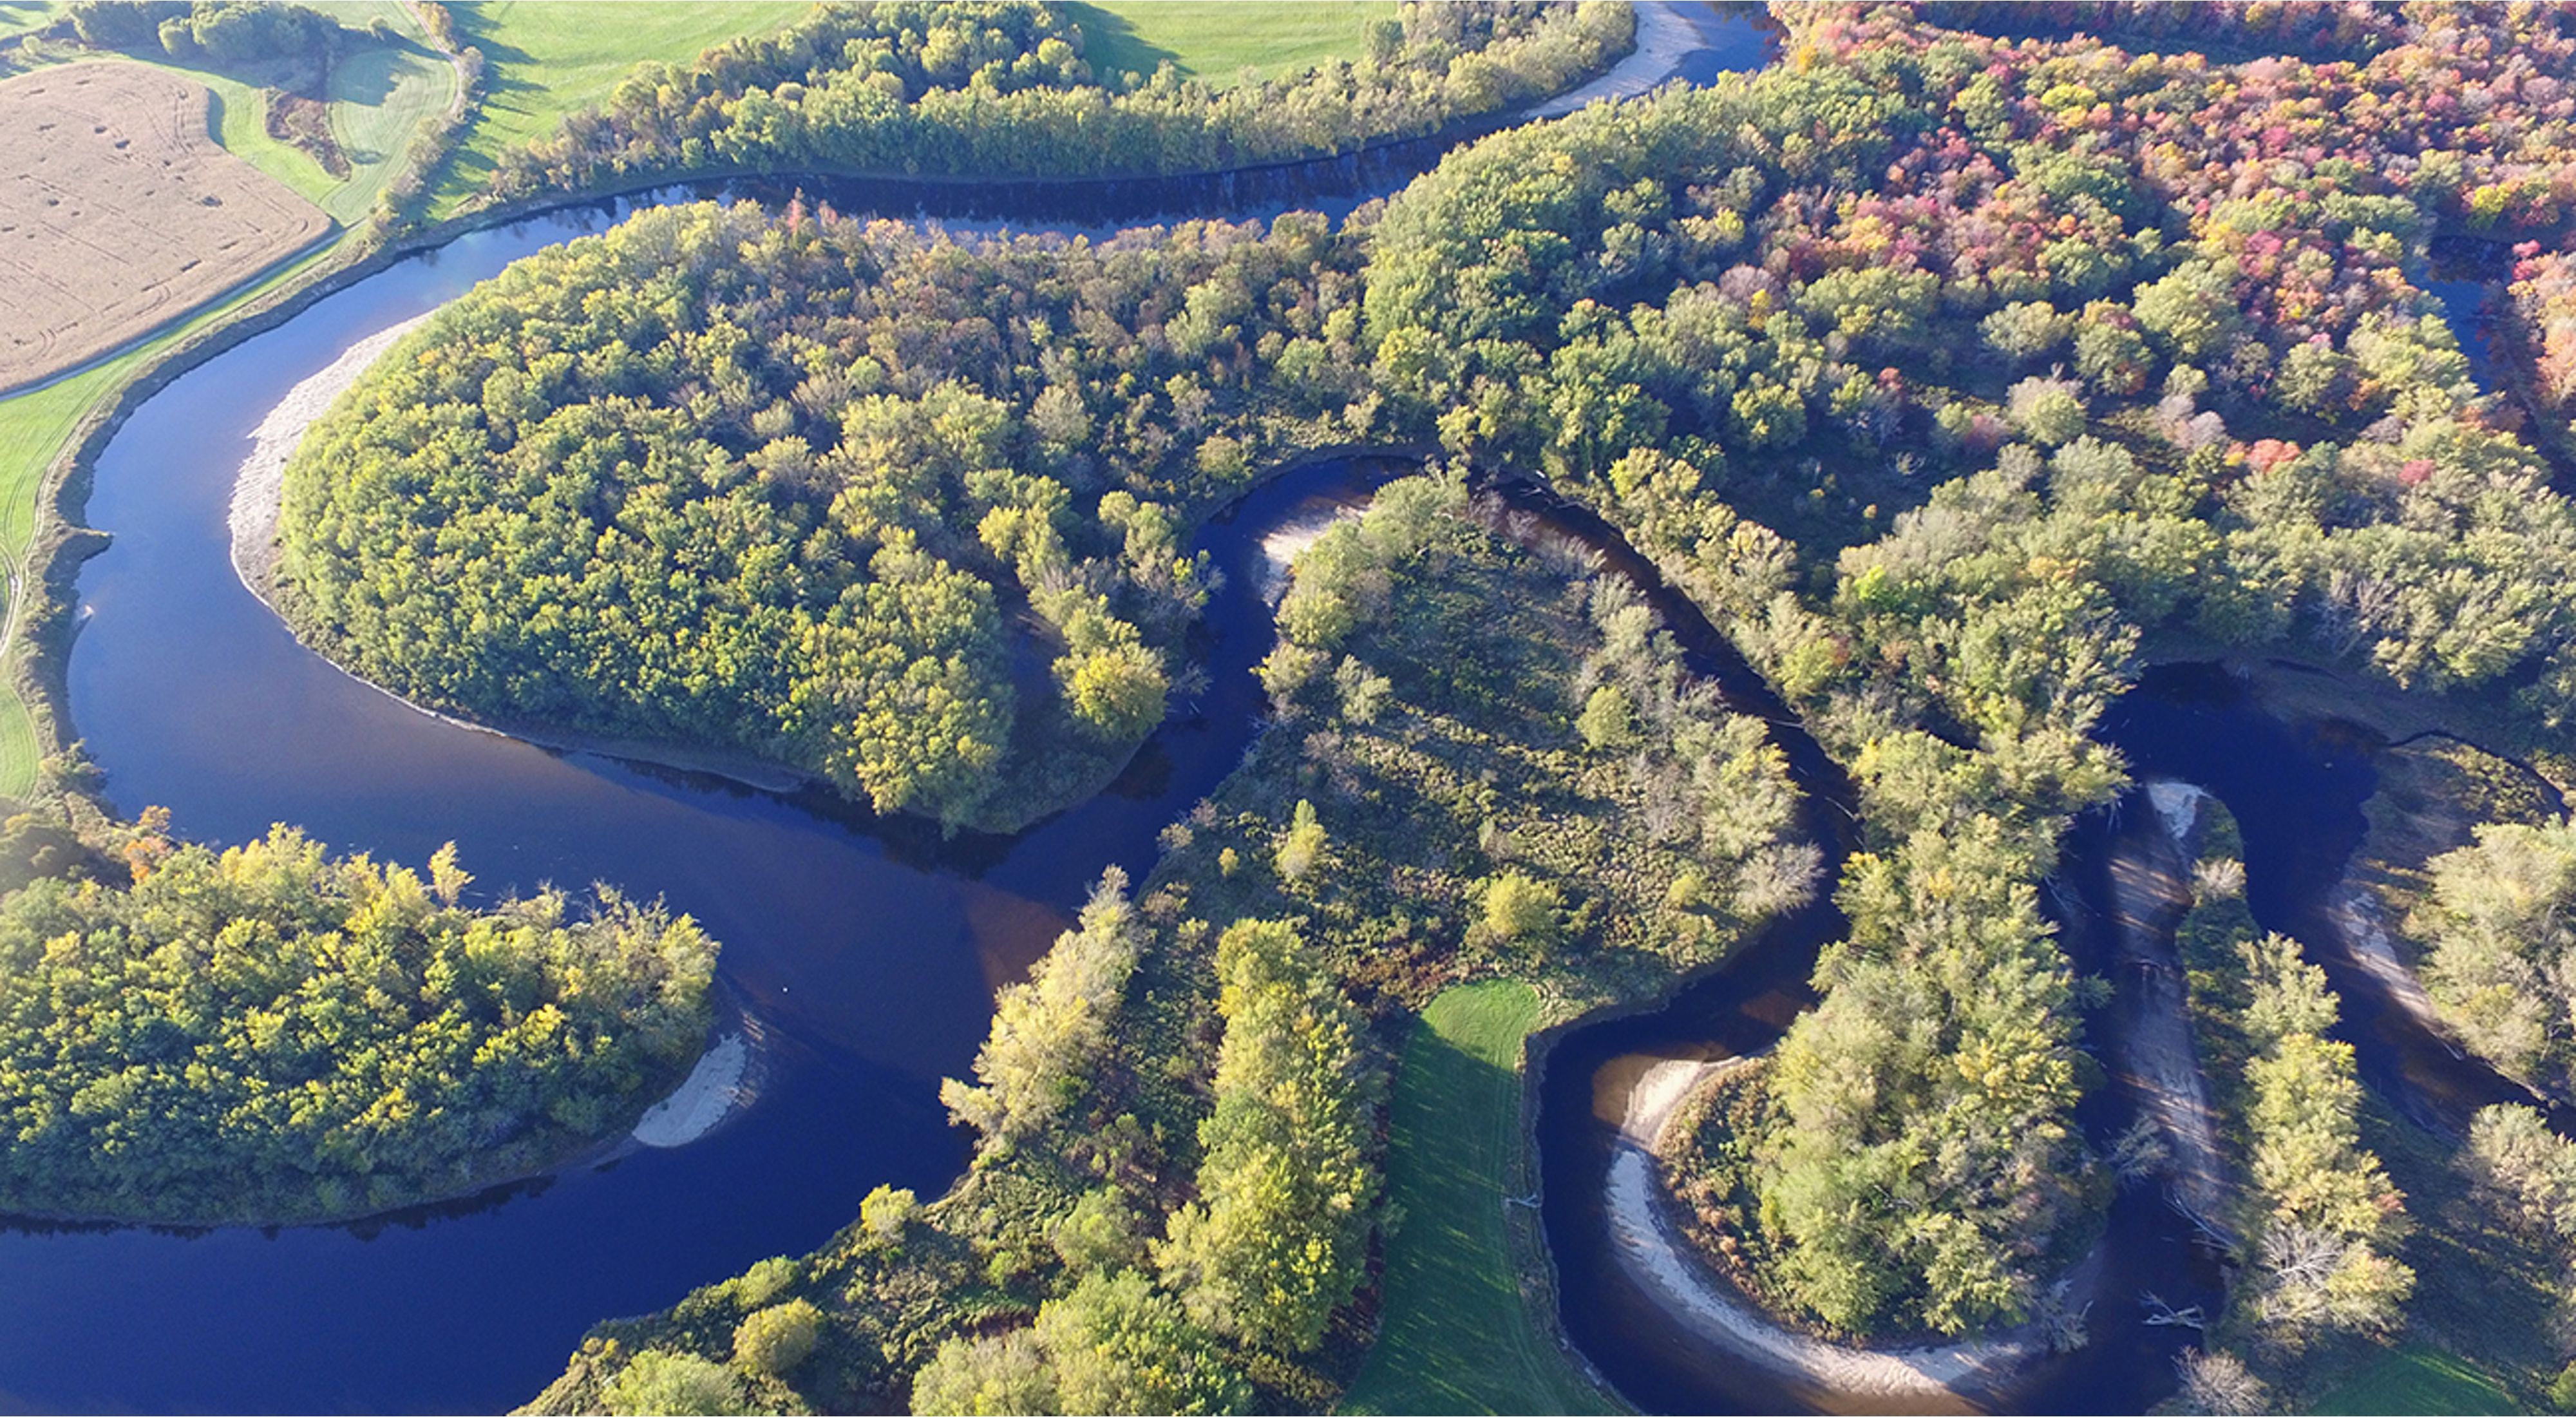 An aerial view of Maidstone Bends Preserve including a winding river through a forest.